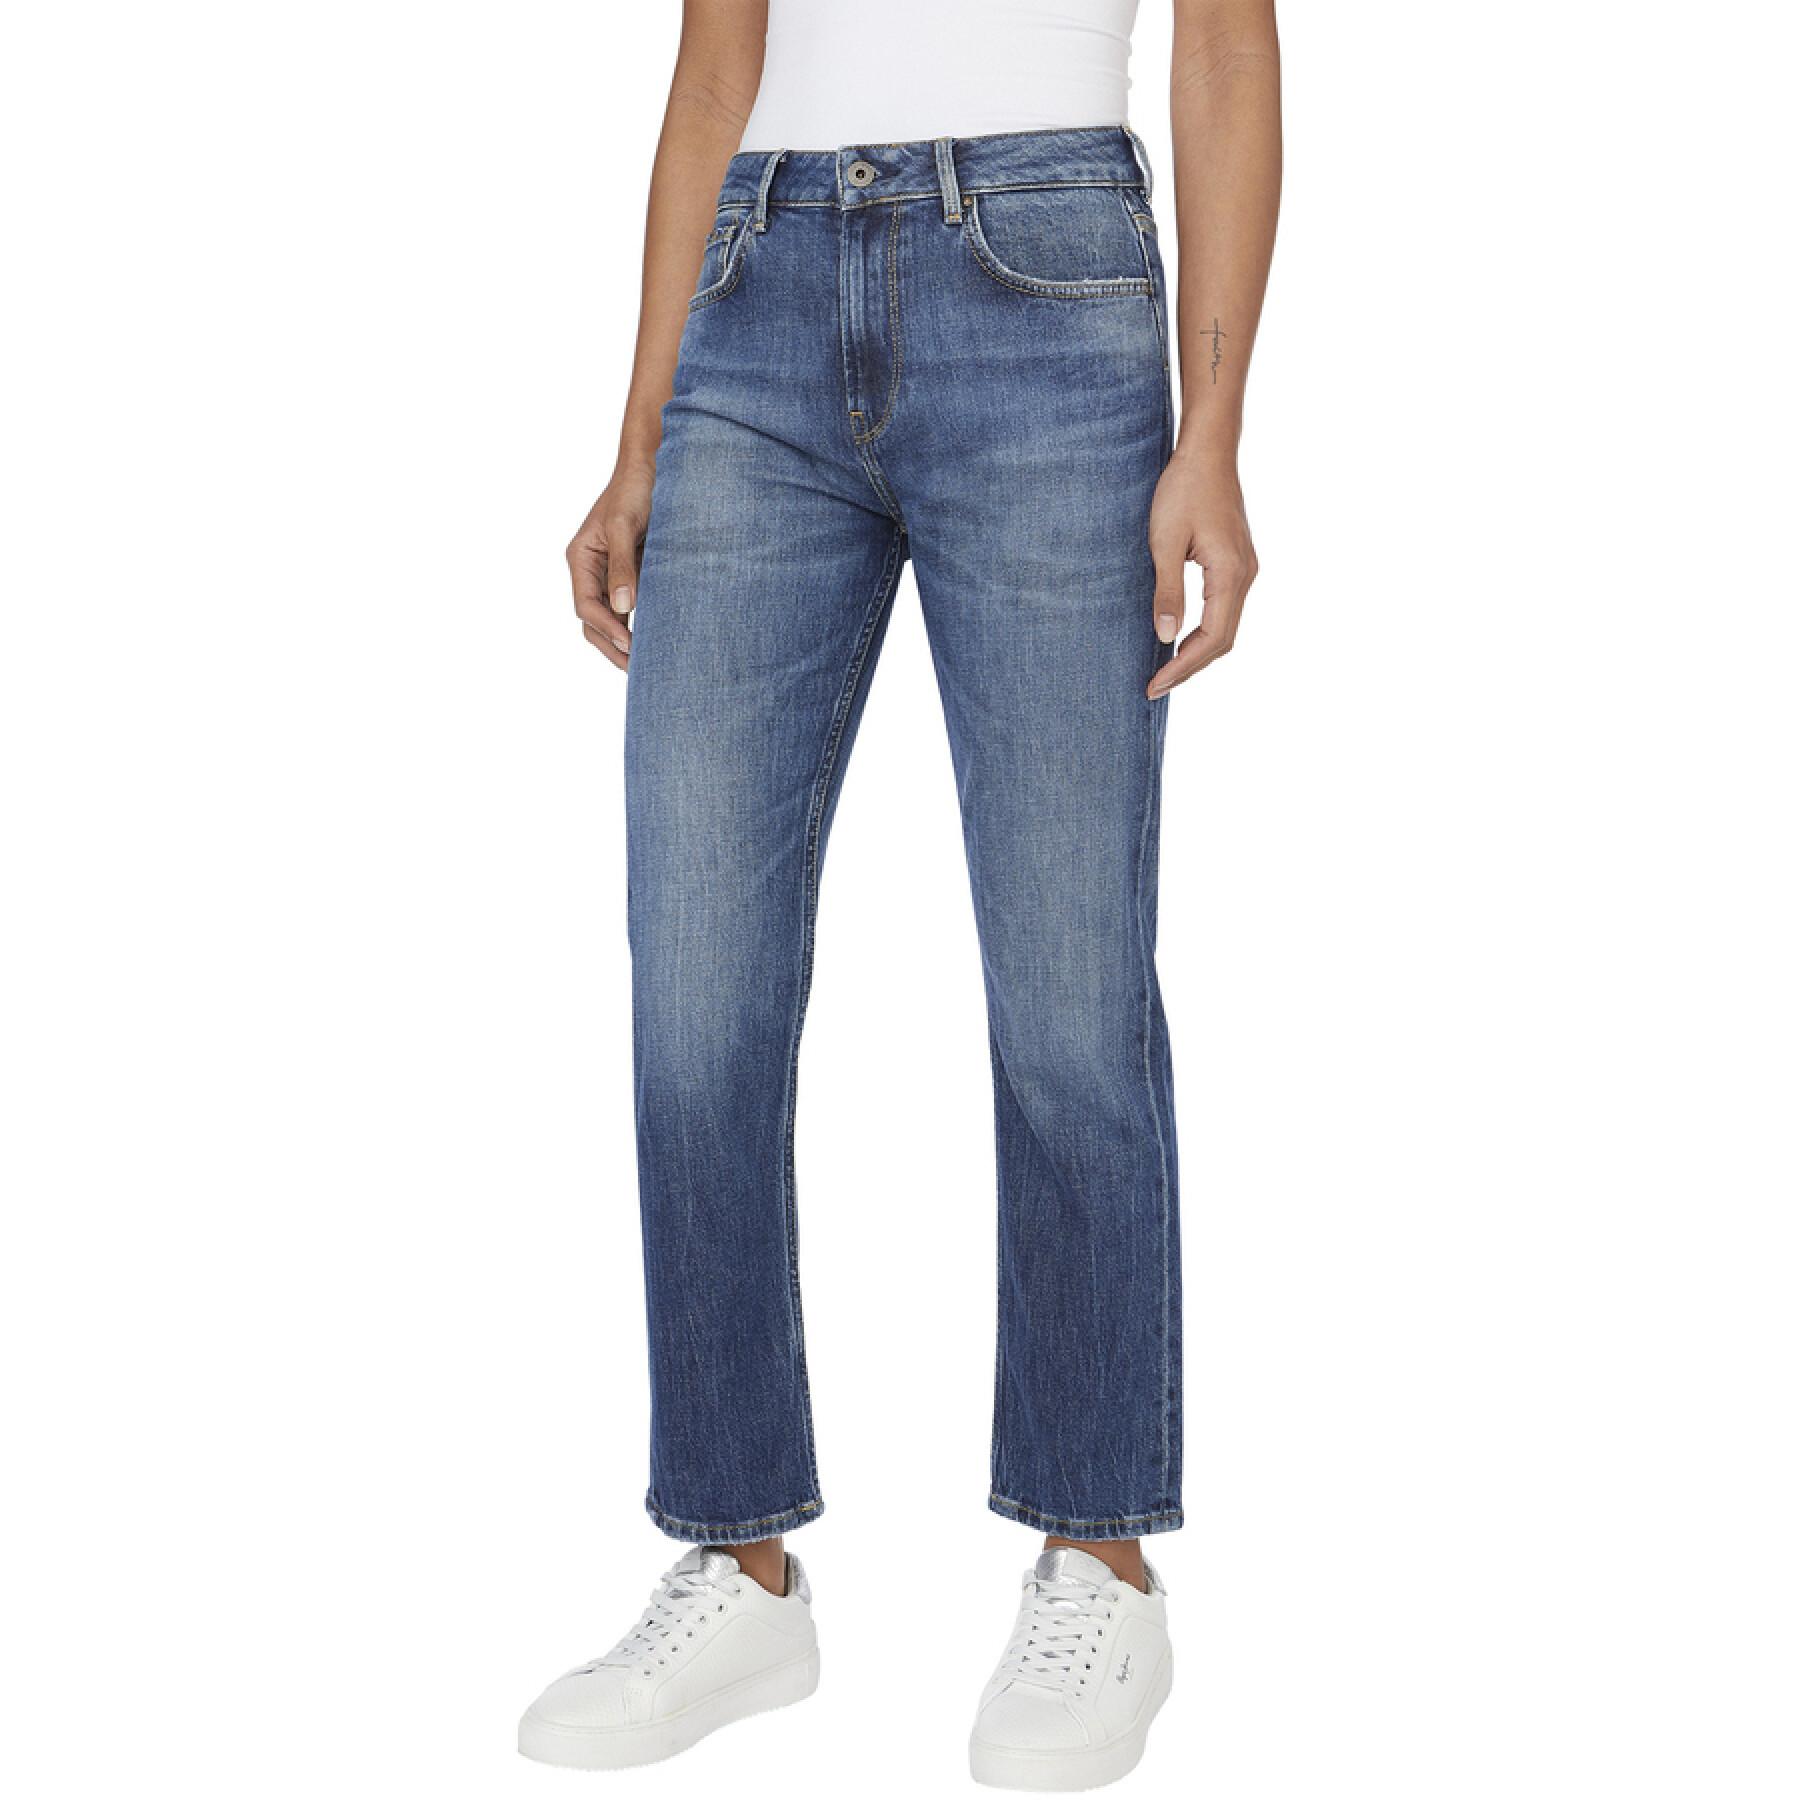 Women's jeans Pepe Jeans Mary